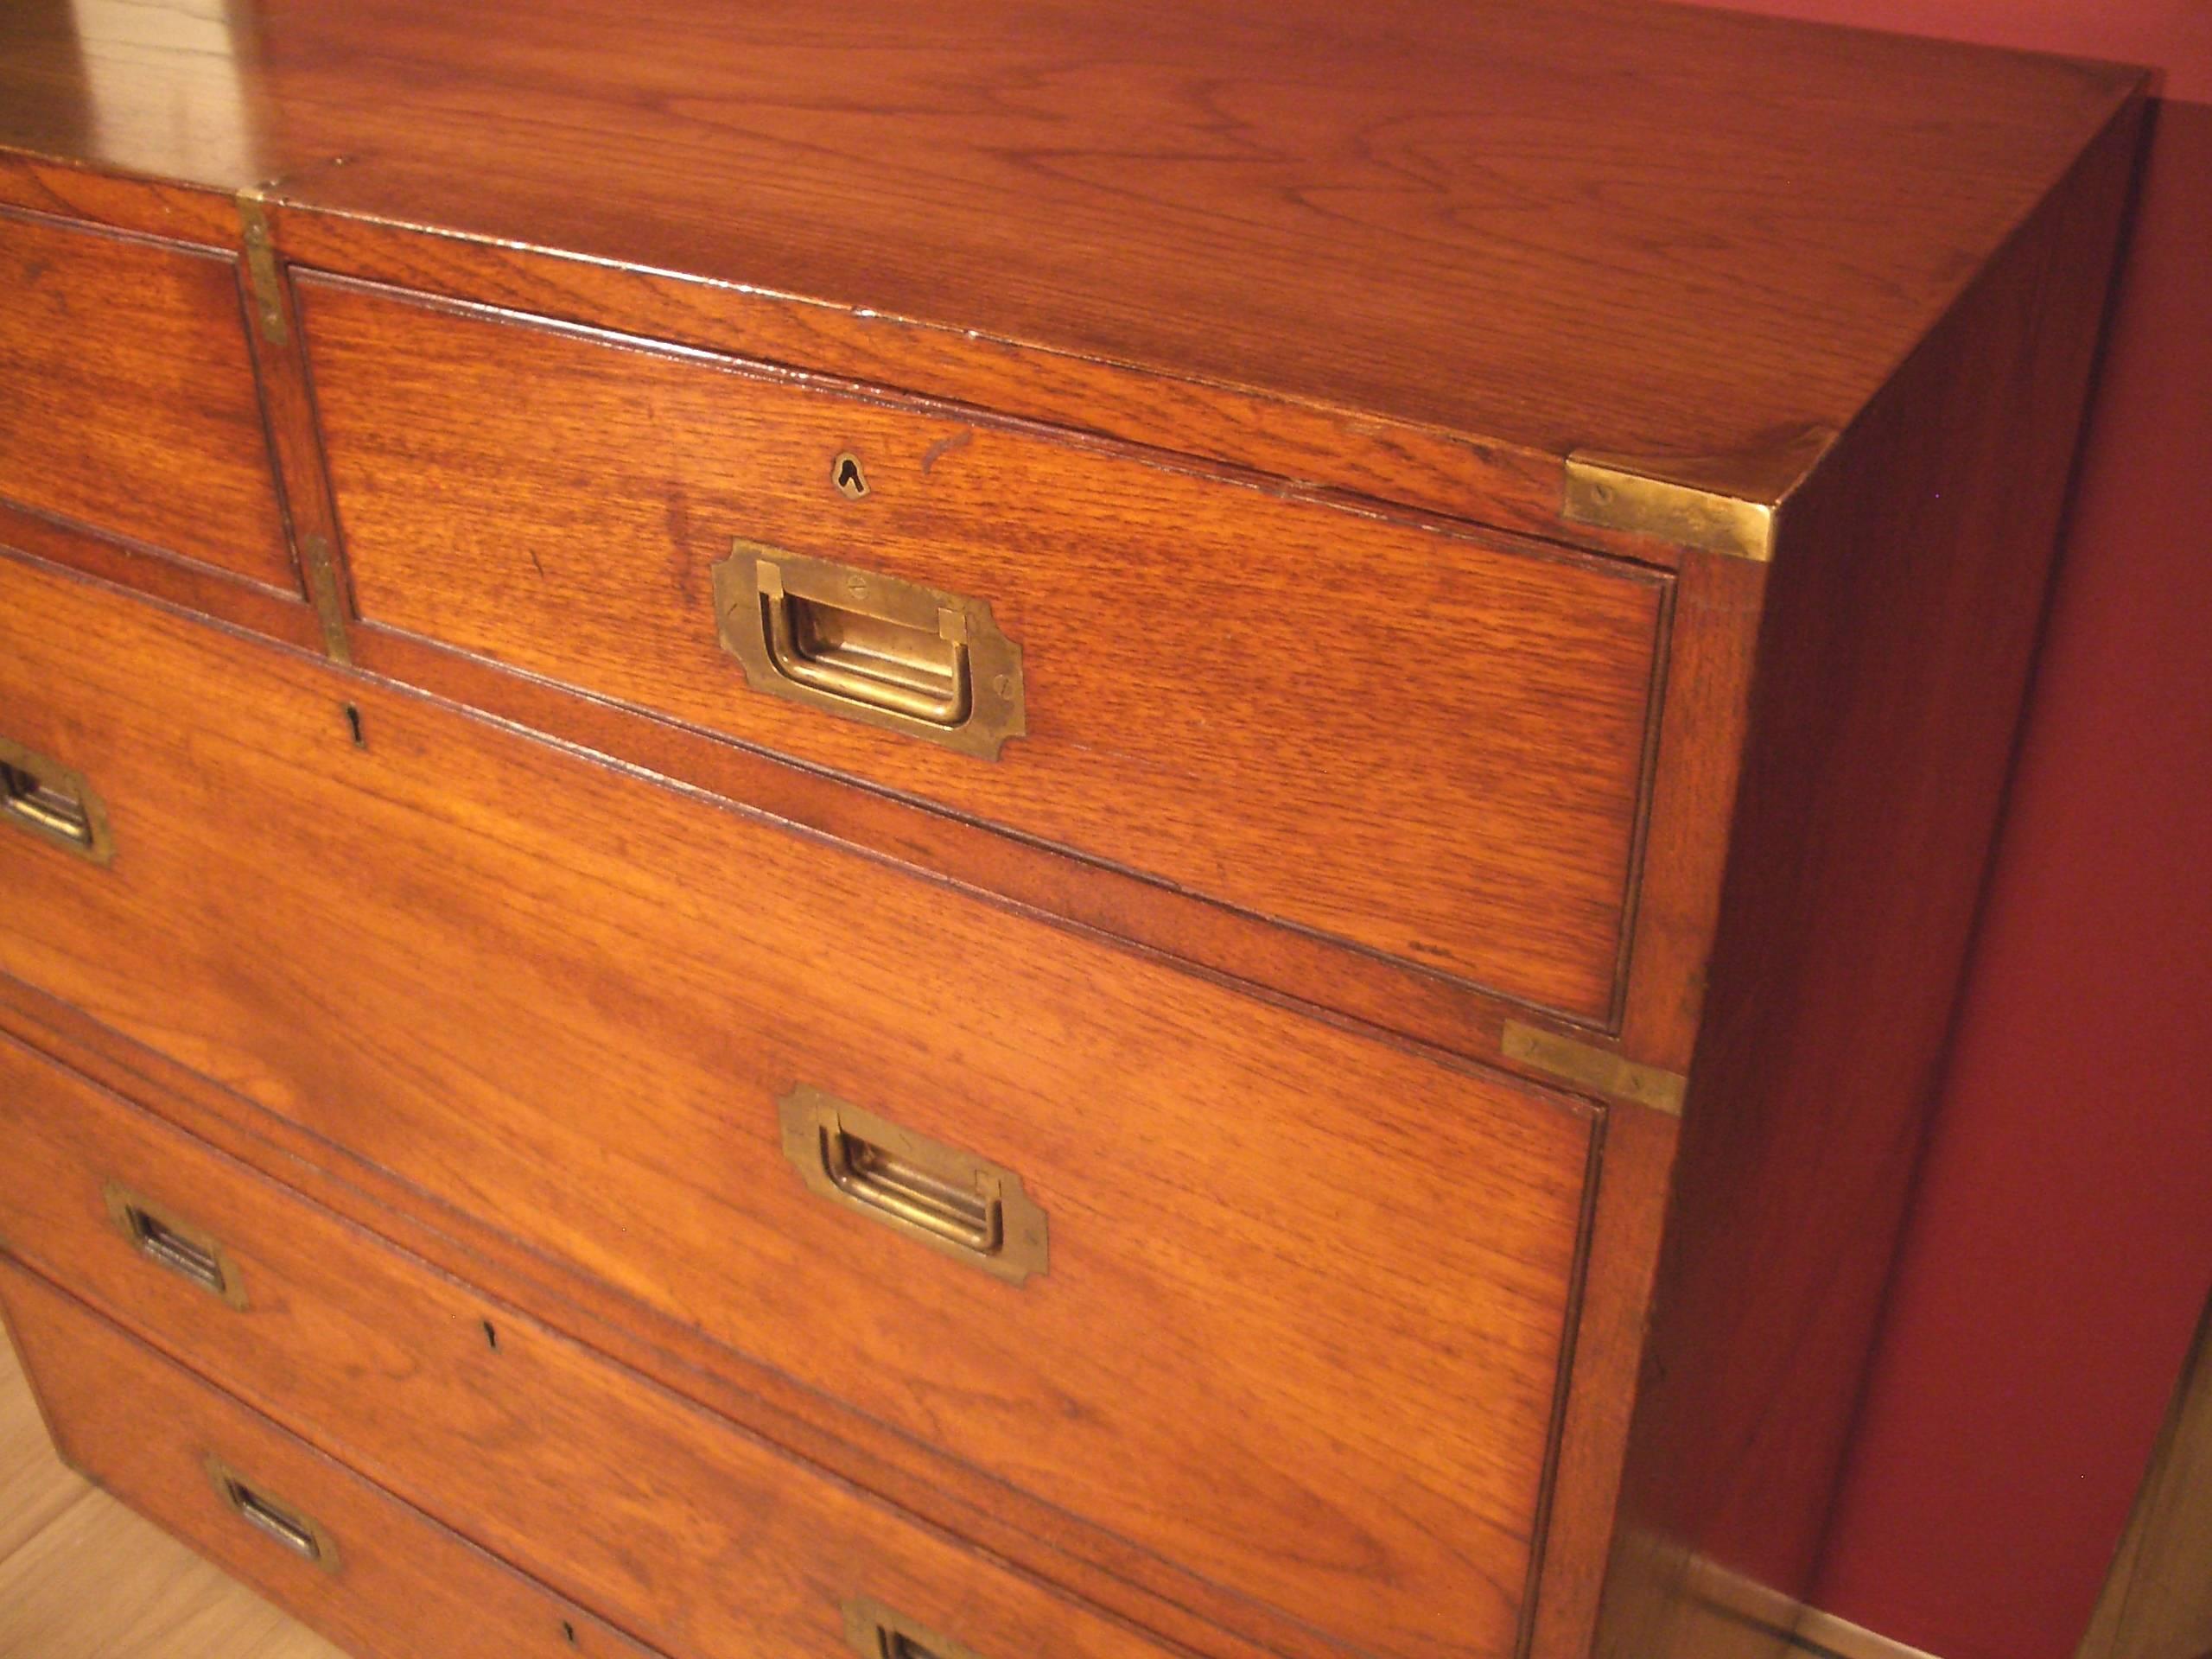 Great Britain (UK) 19th Century Teak Wooden Victorian Campaign Chest of Drawers